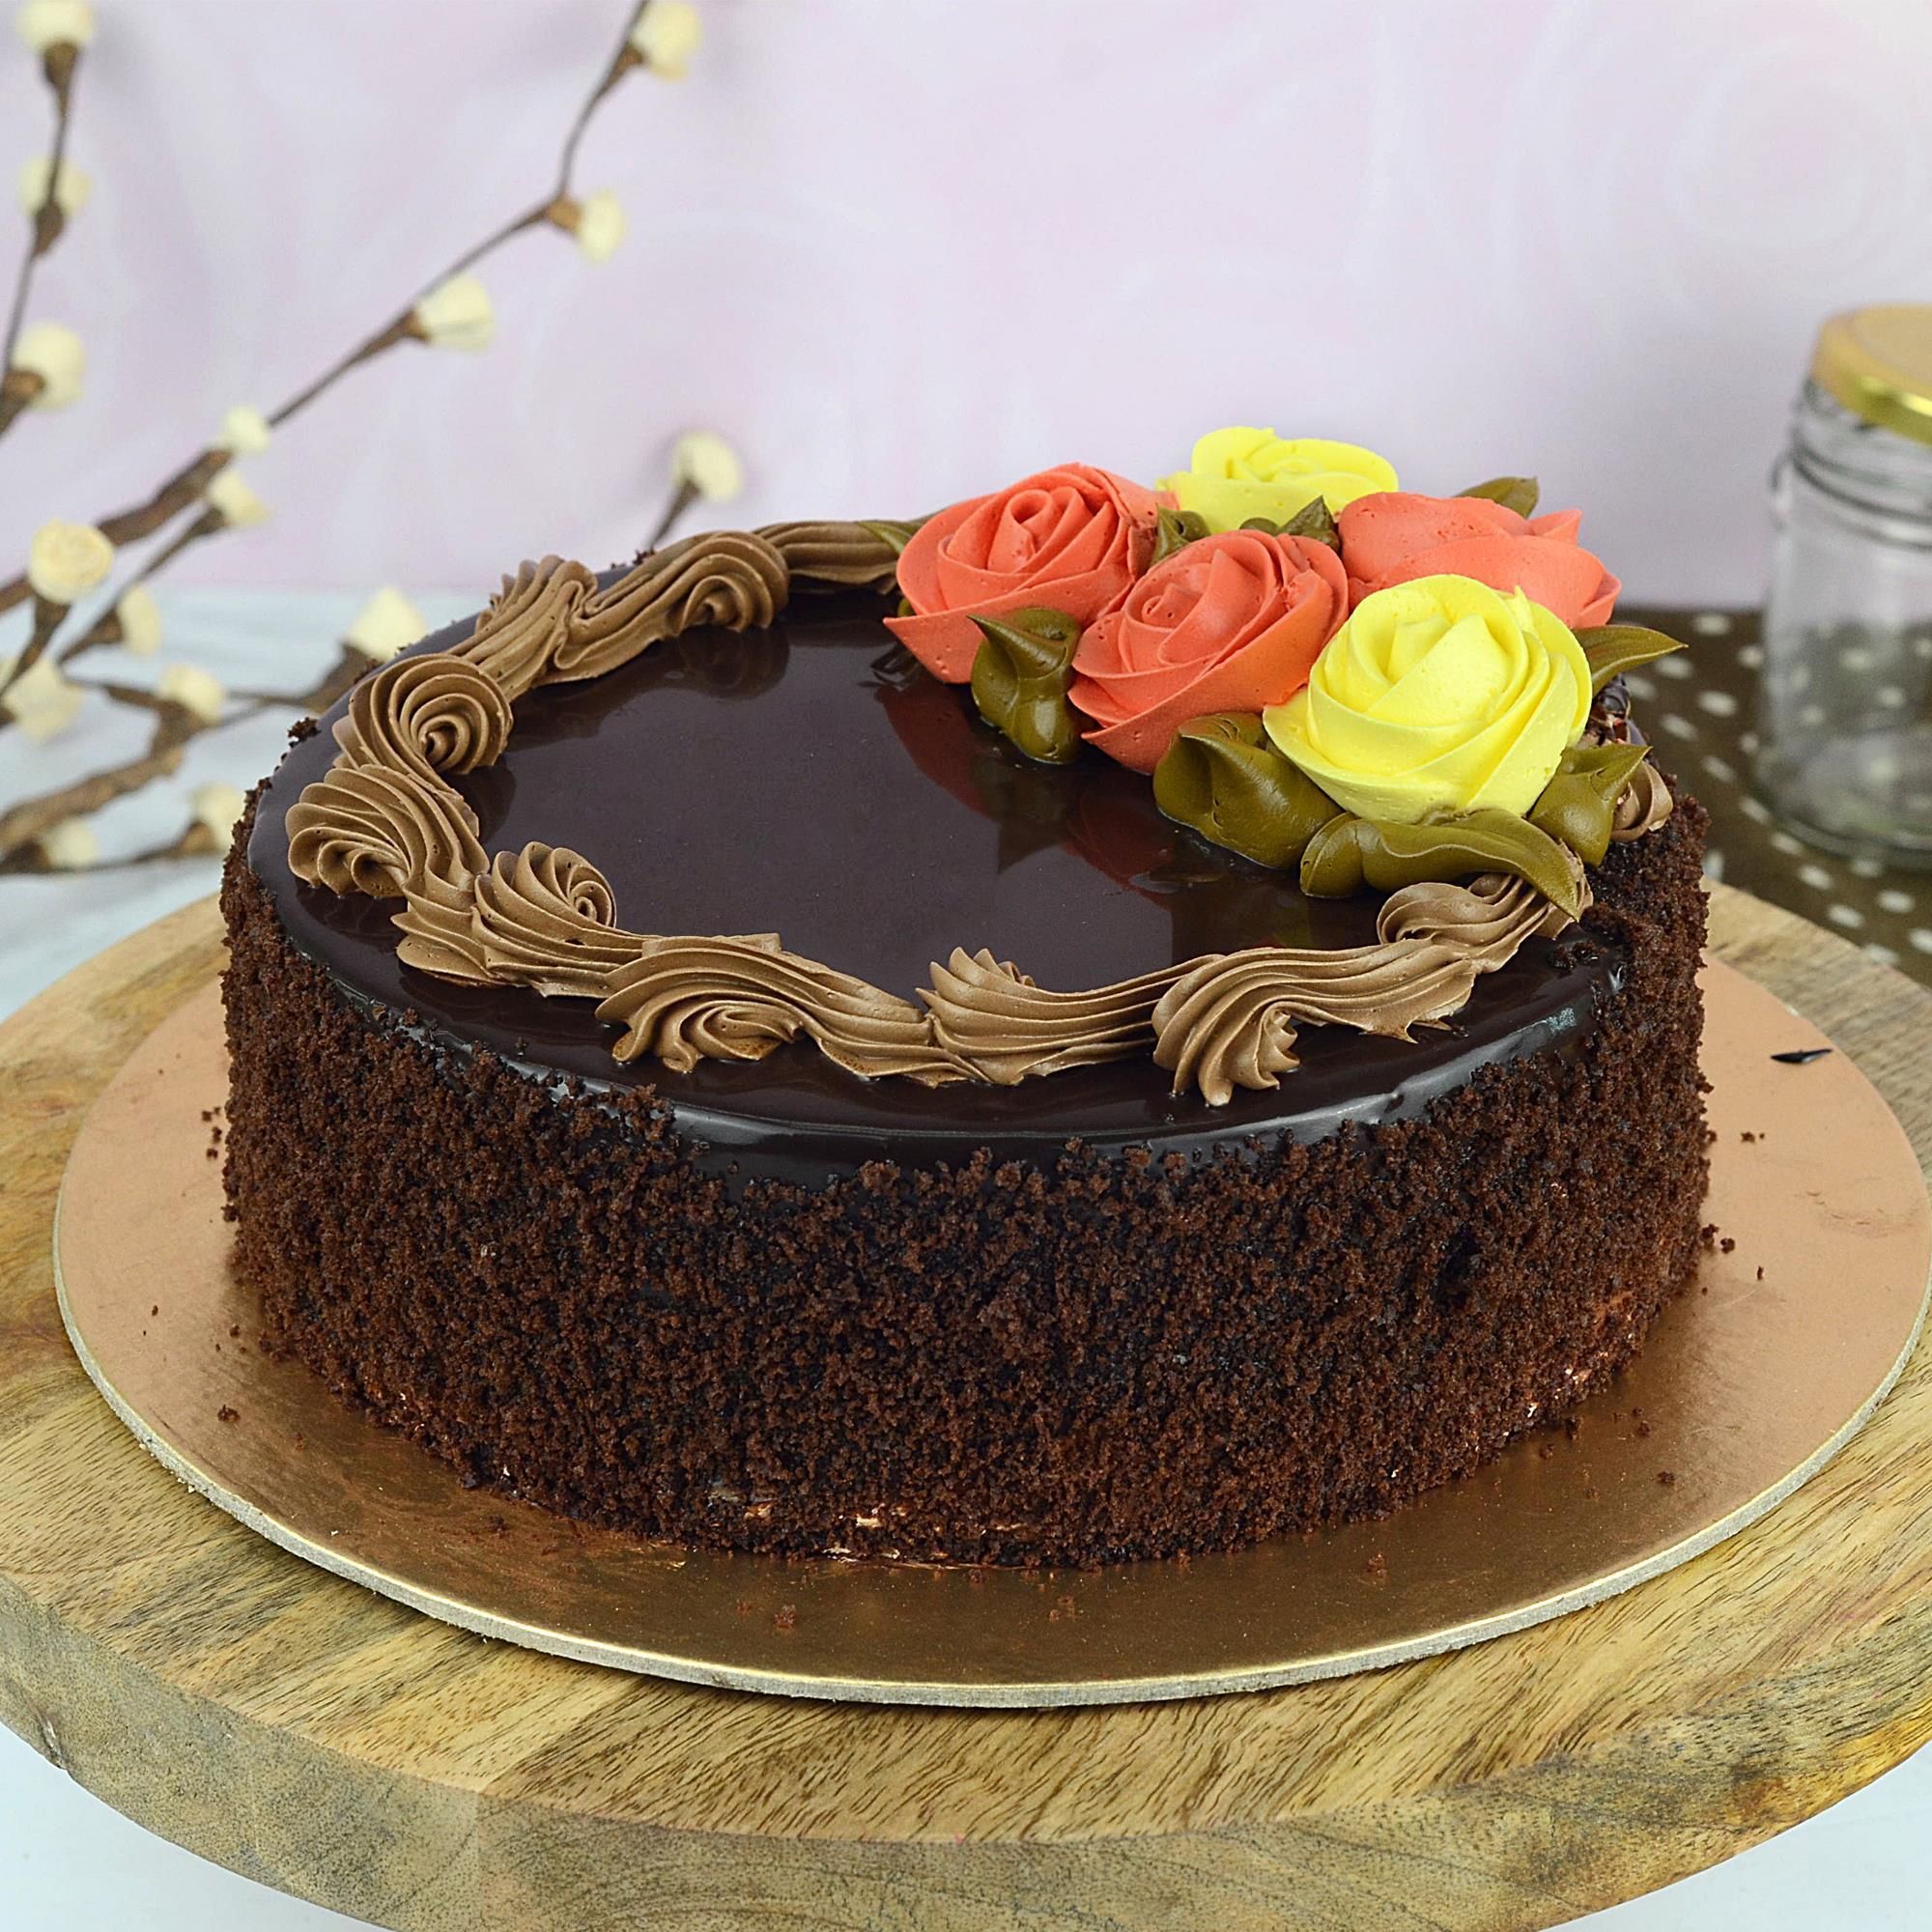 Chocolate Caramel & Walnut Cake Kg - Whole Cakes - Cakes & Pastries - Bakery  - Fresh & Chilled - Products - Supermercado Apolónia